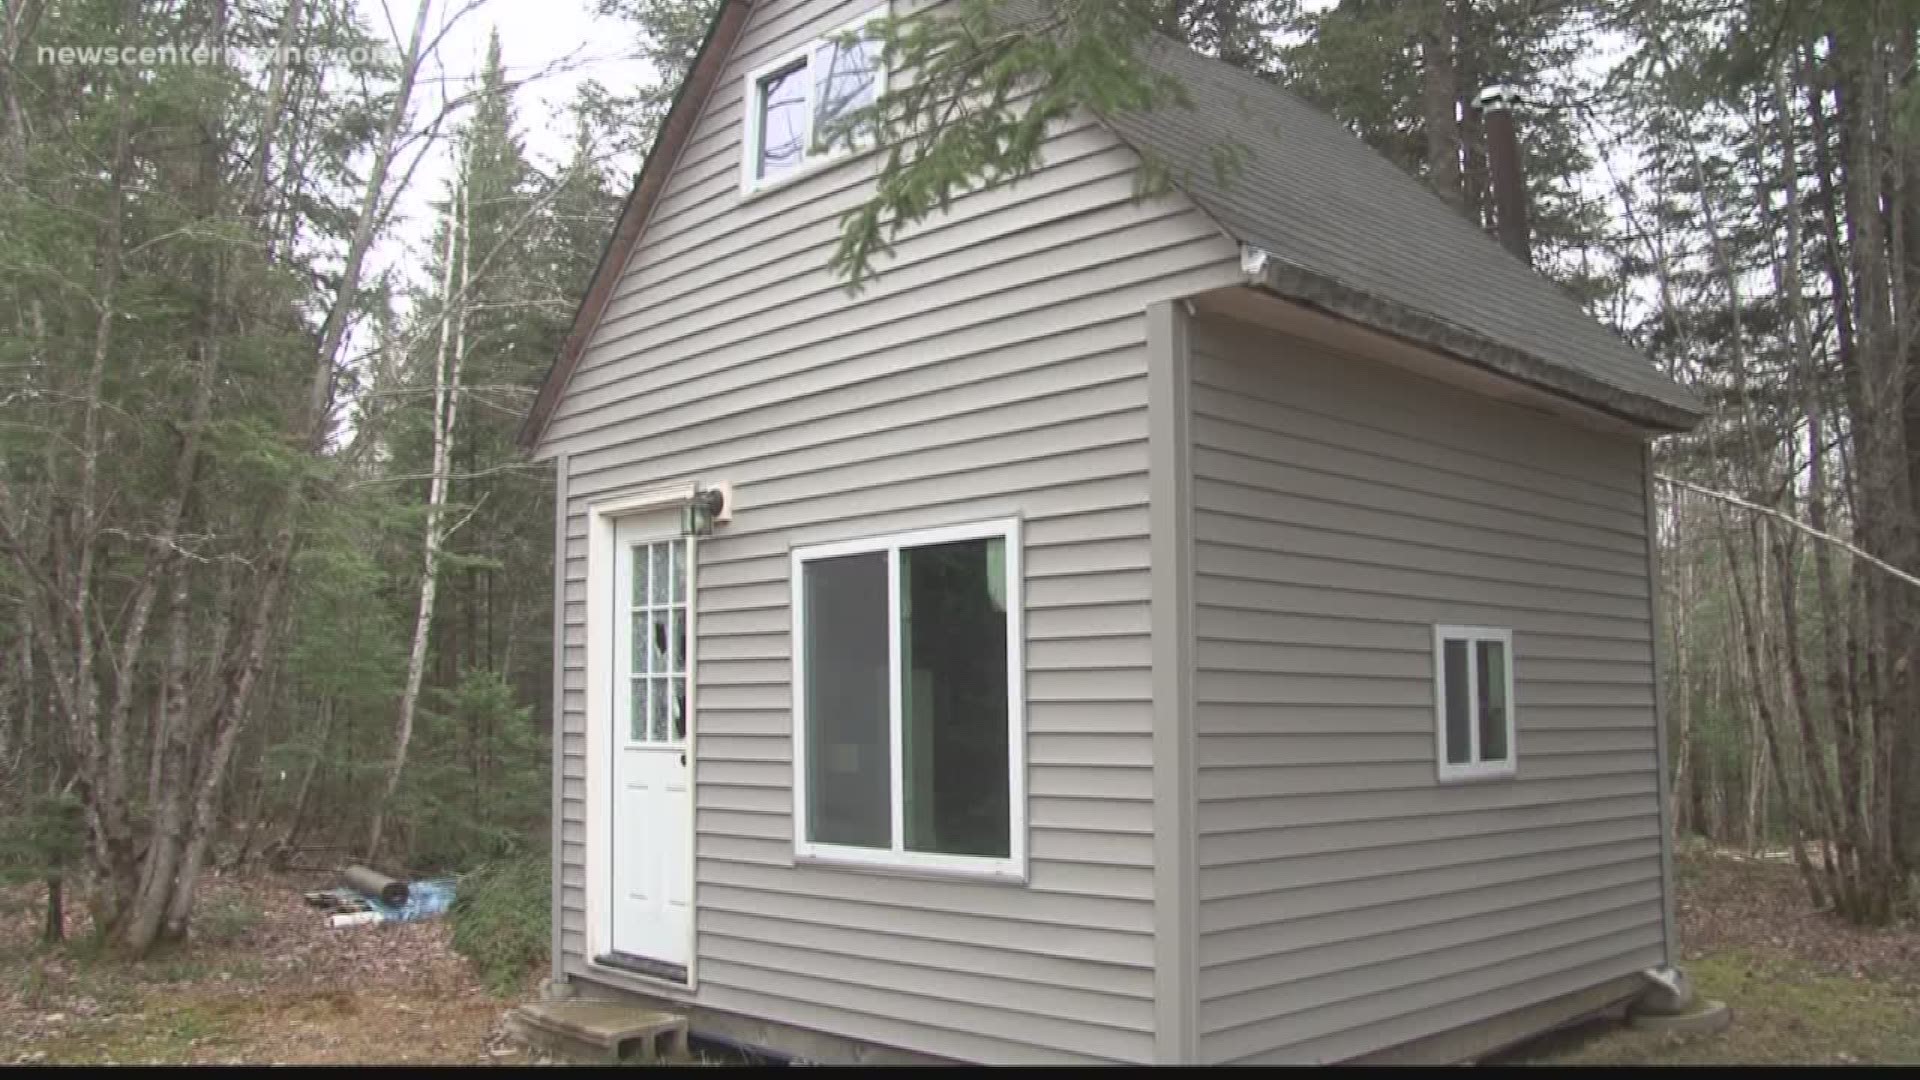 The cabin where officials believe Williams hid 